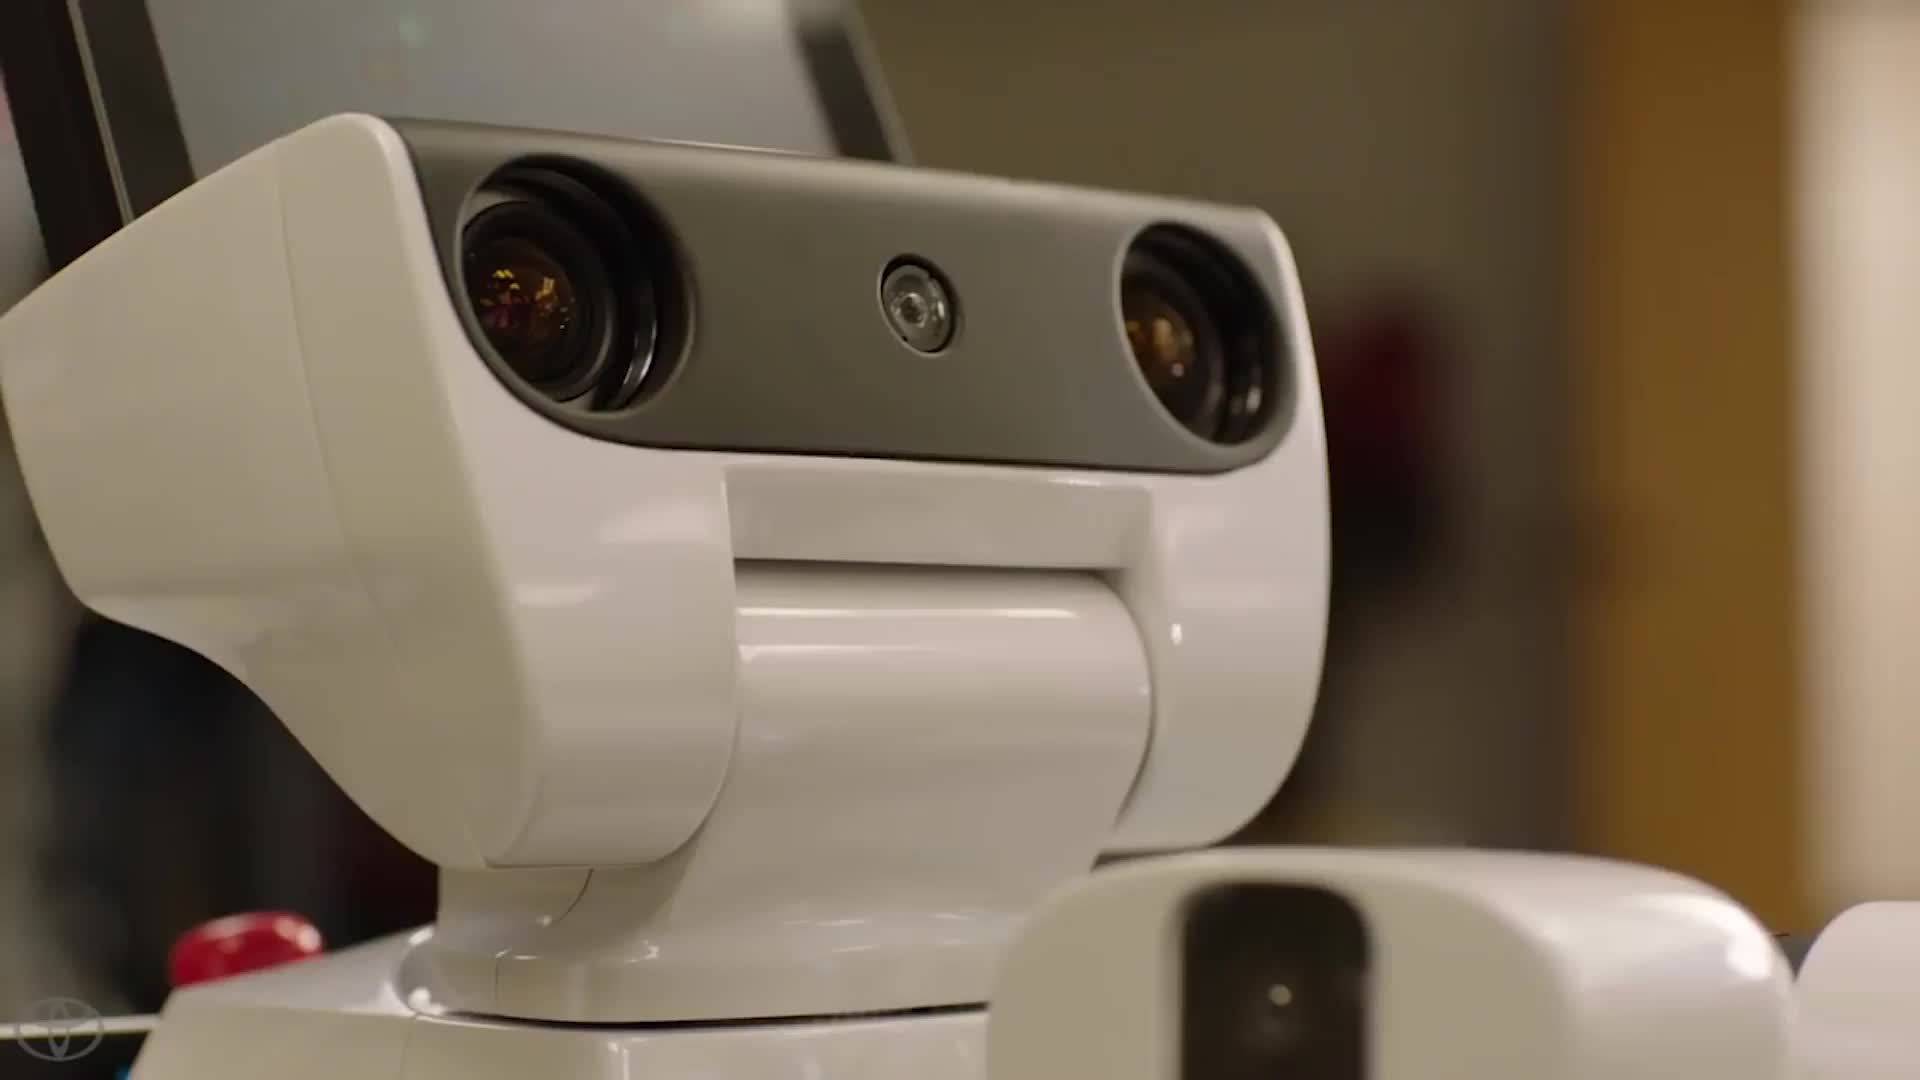 Watch The Robot That Supports a Paralyzed Vet | WIRED